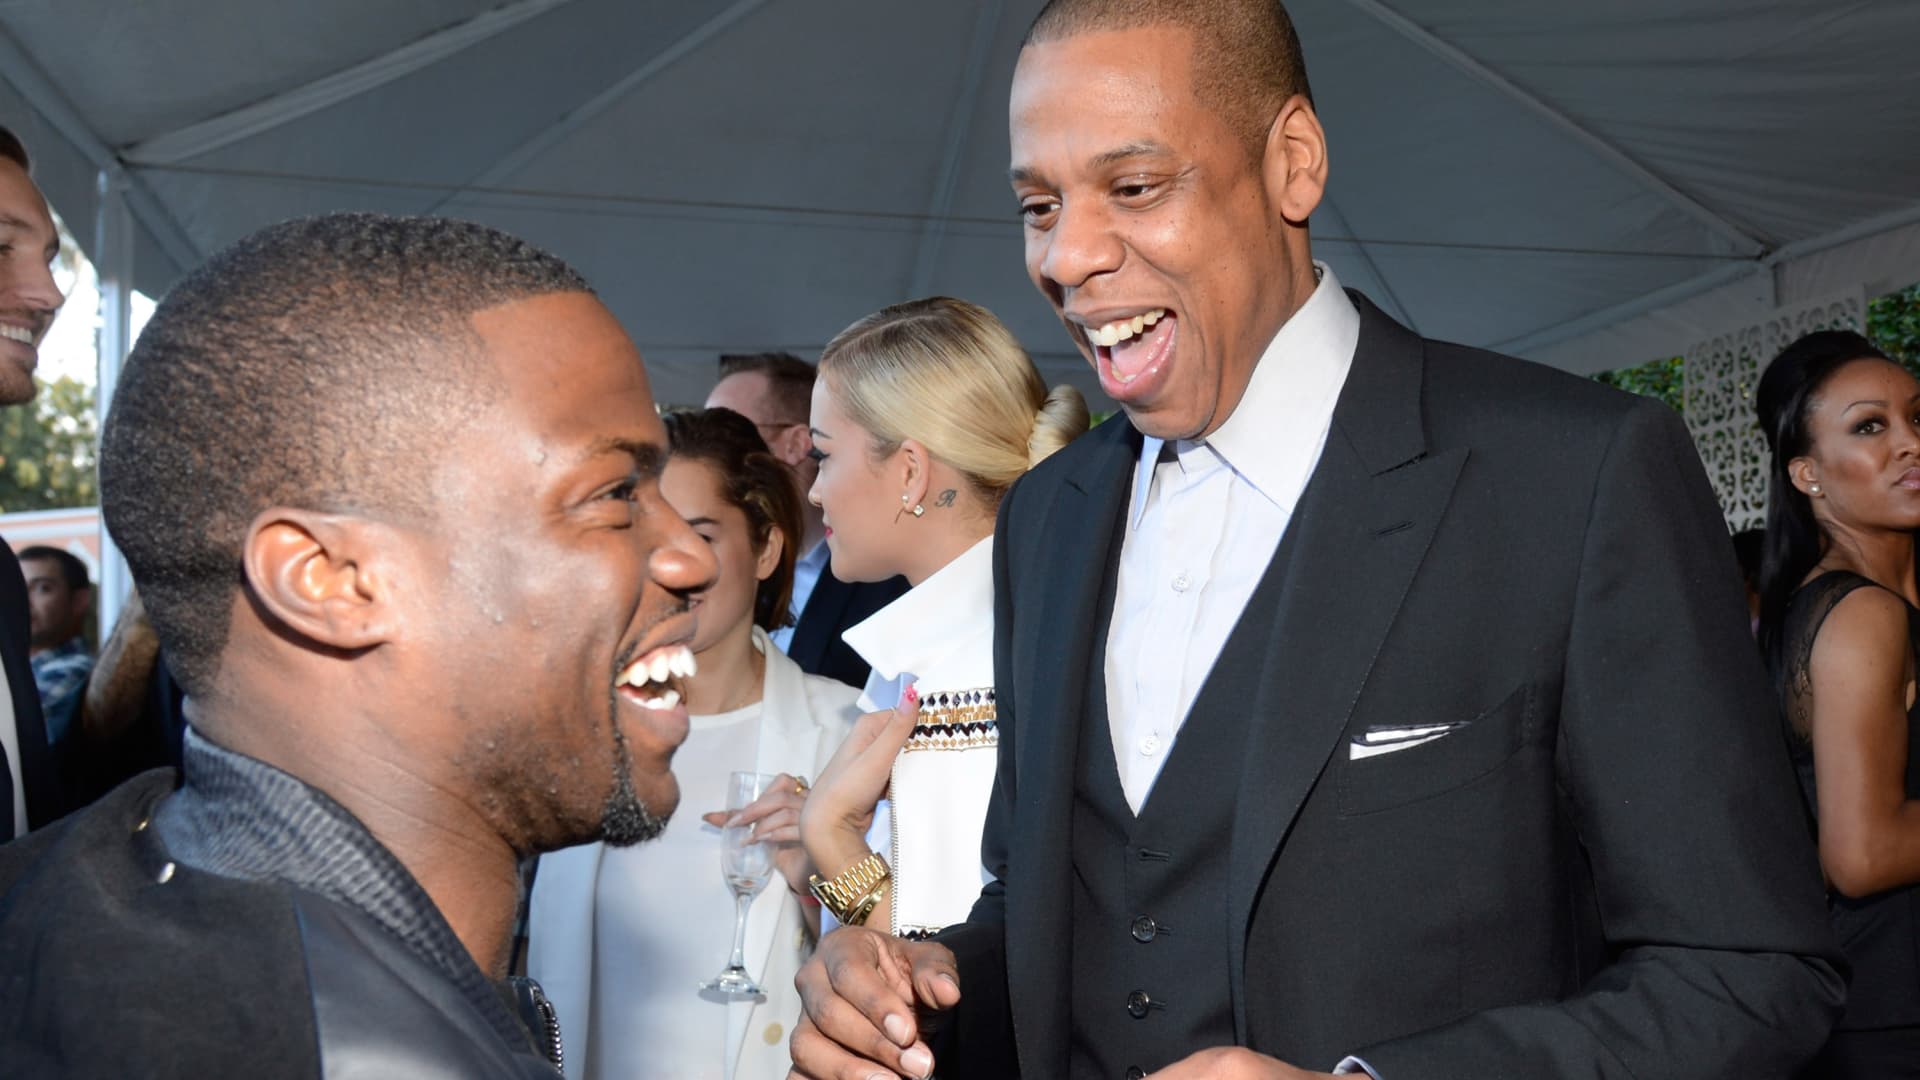 Kevin Hart and Jay-Z attend the Roc Nation Pre-GRAMMY Brunch presented by MAC Viva Glam at Private Residence on January 25, 2014 in Beverly Hills, California.